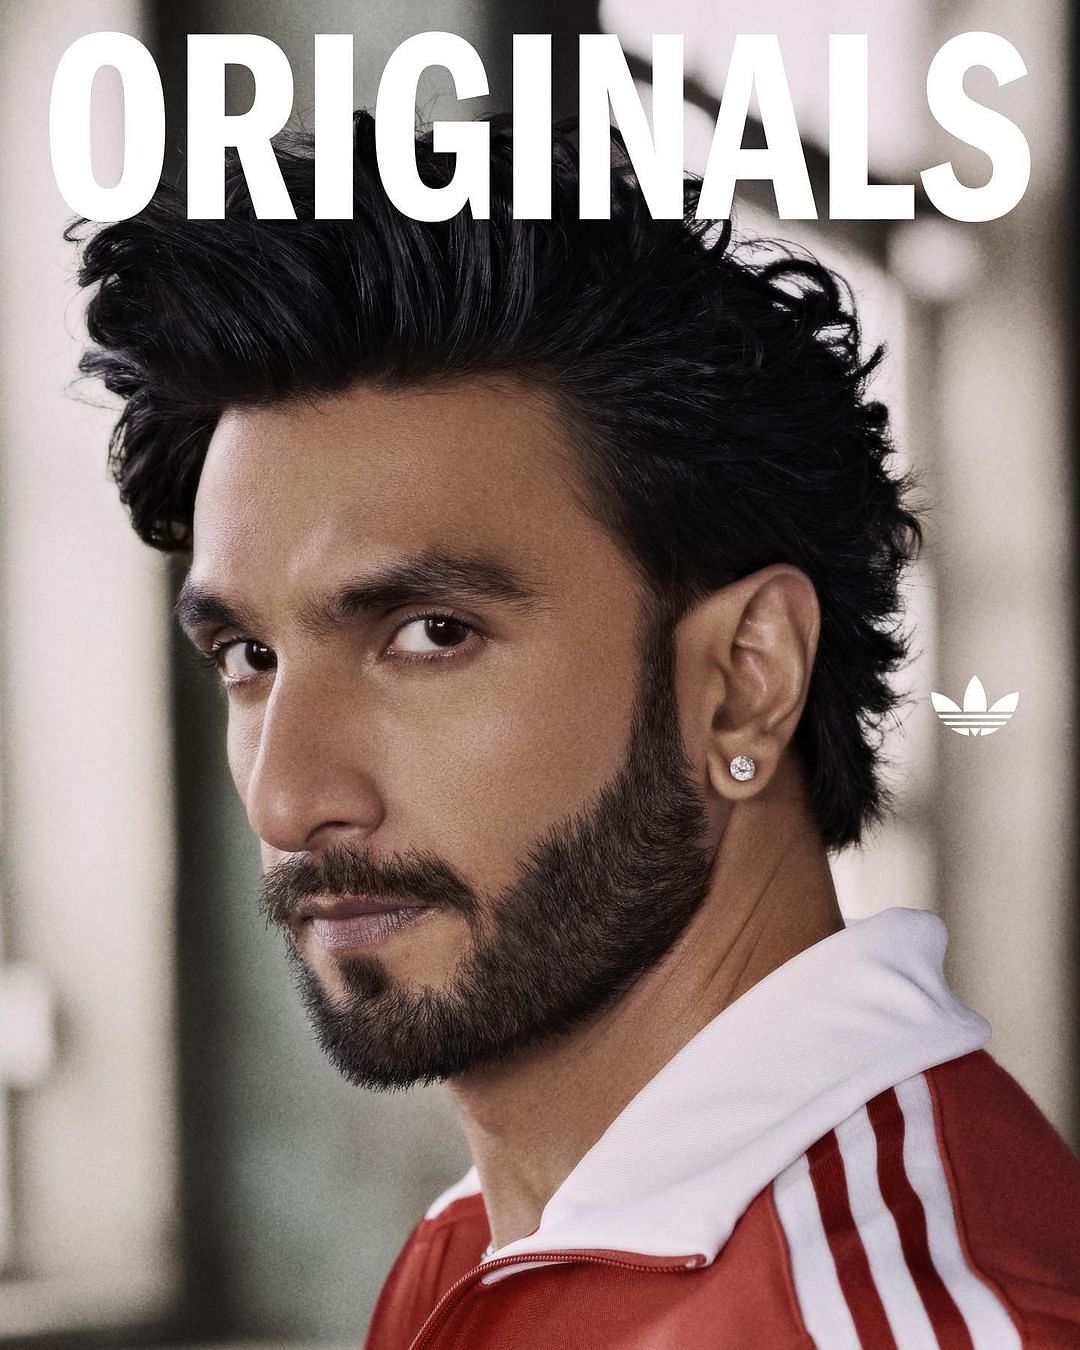 Singh's collaboration with Adidas India